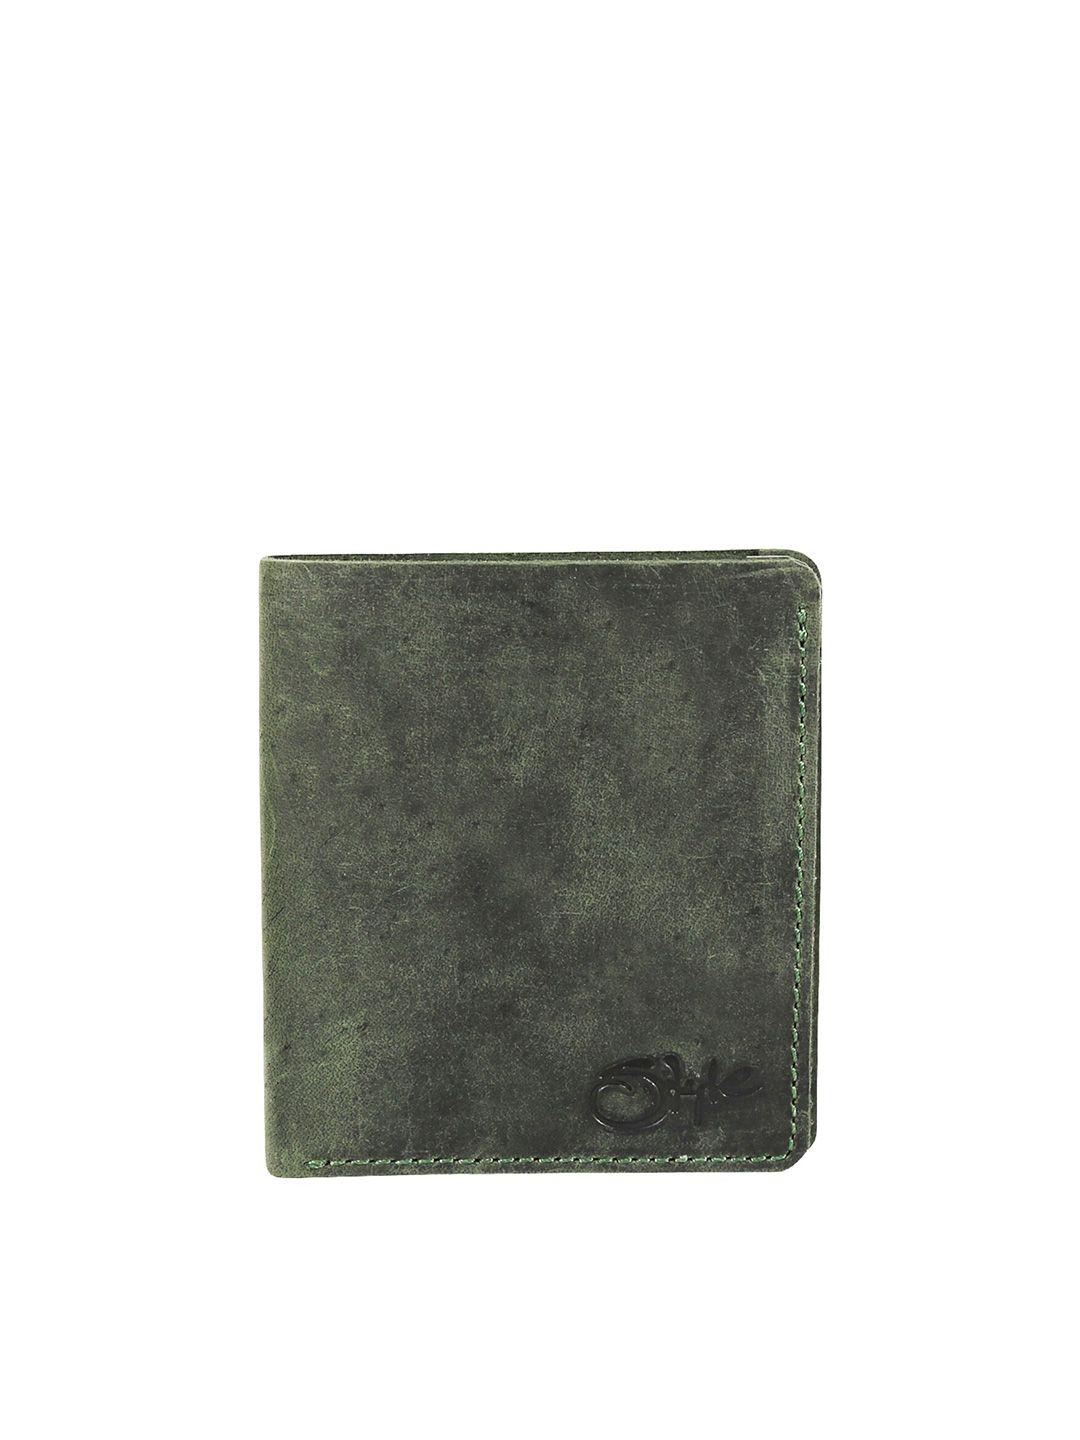 style shoes unisex green rfid leather two fold wallet